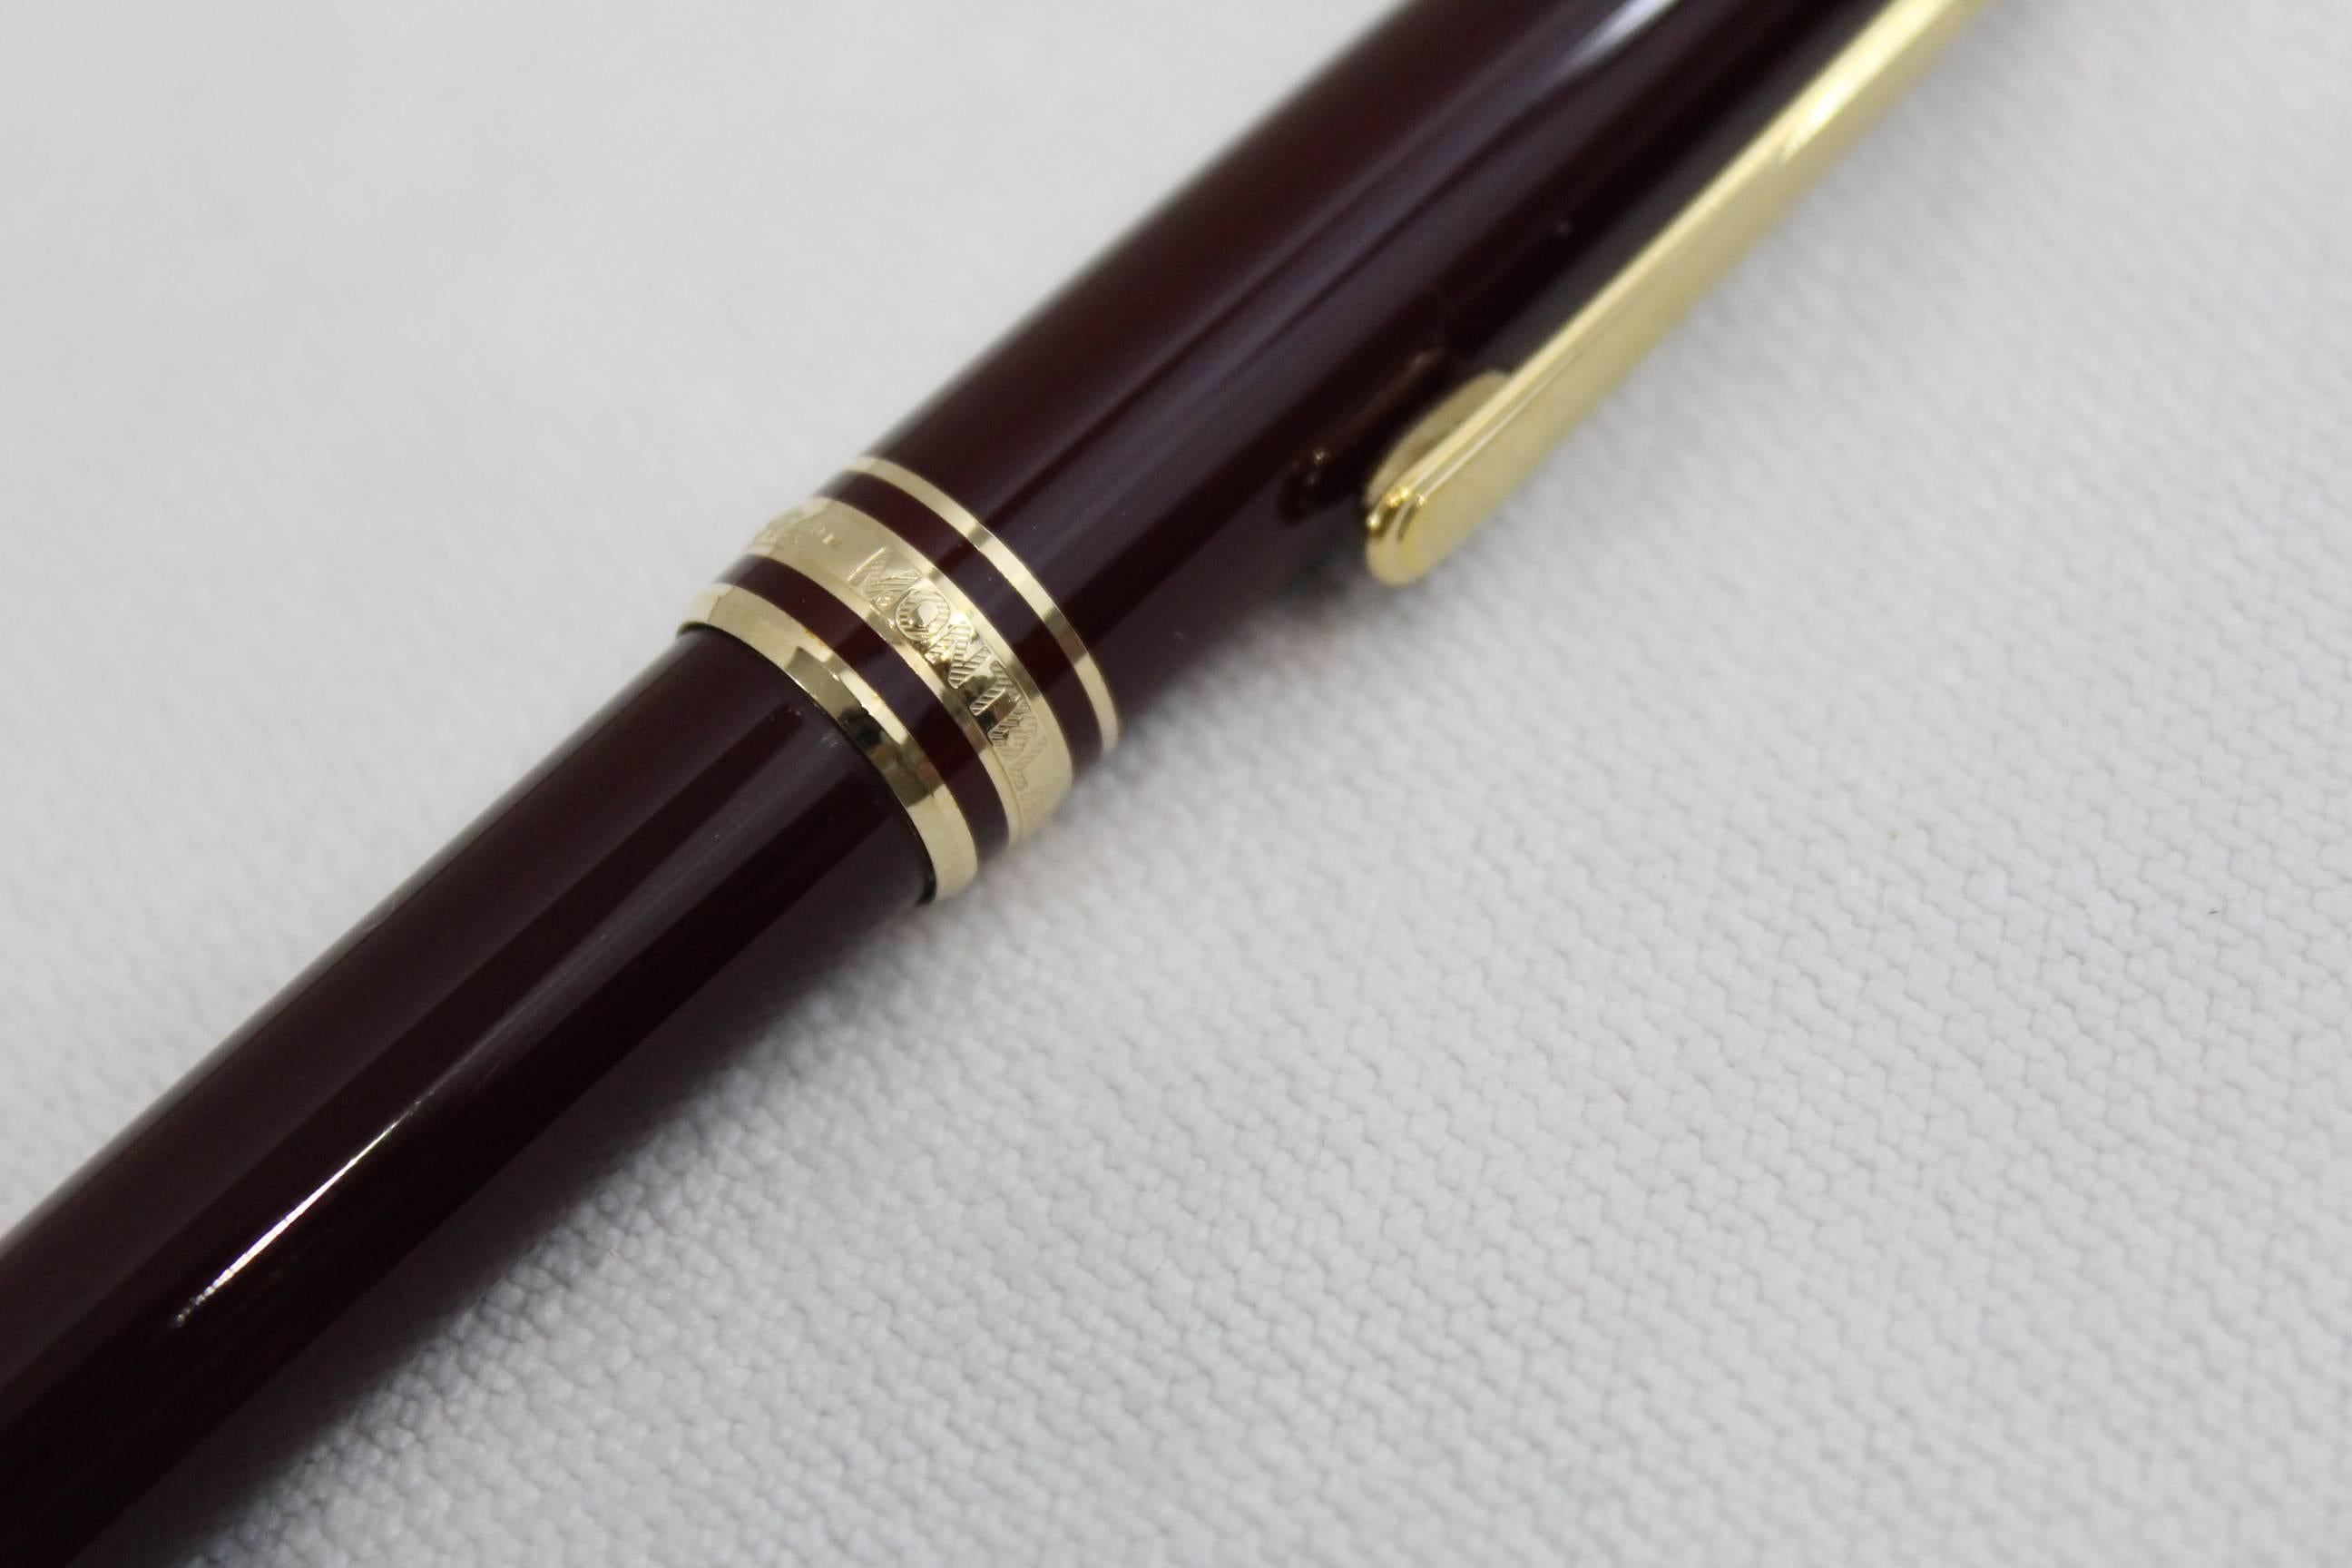 Nice Vintage Montblanc pen with red ink. This model is no longer edited (in this color)